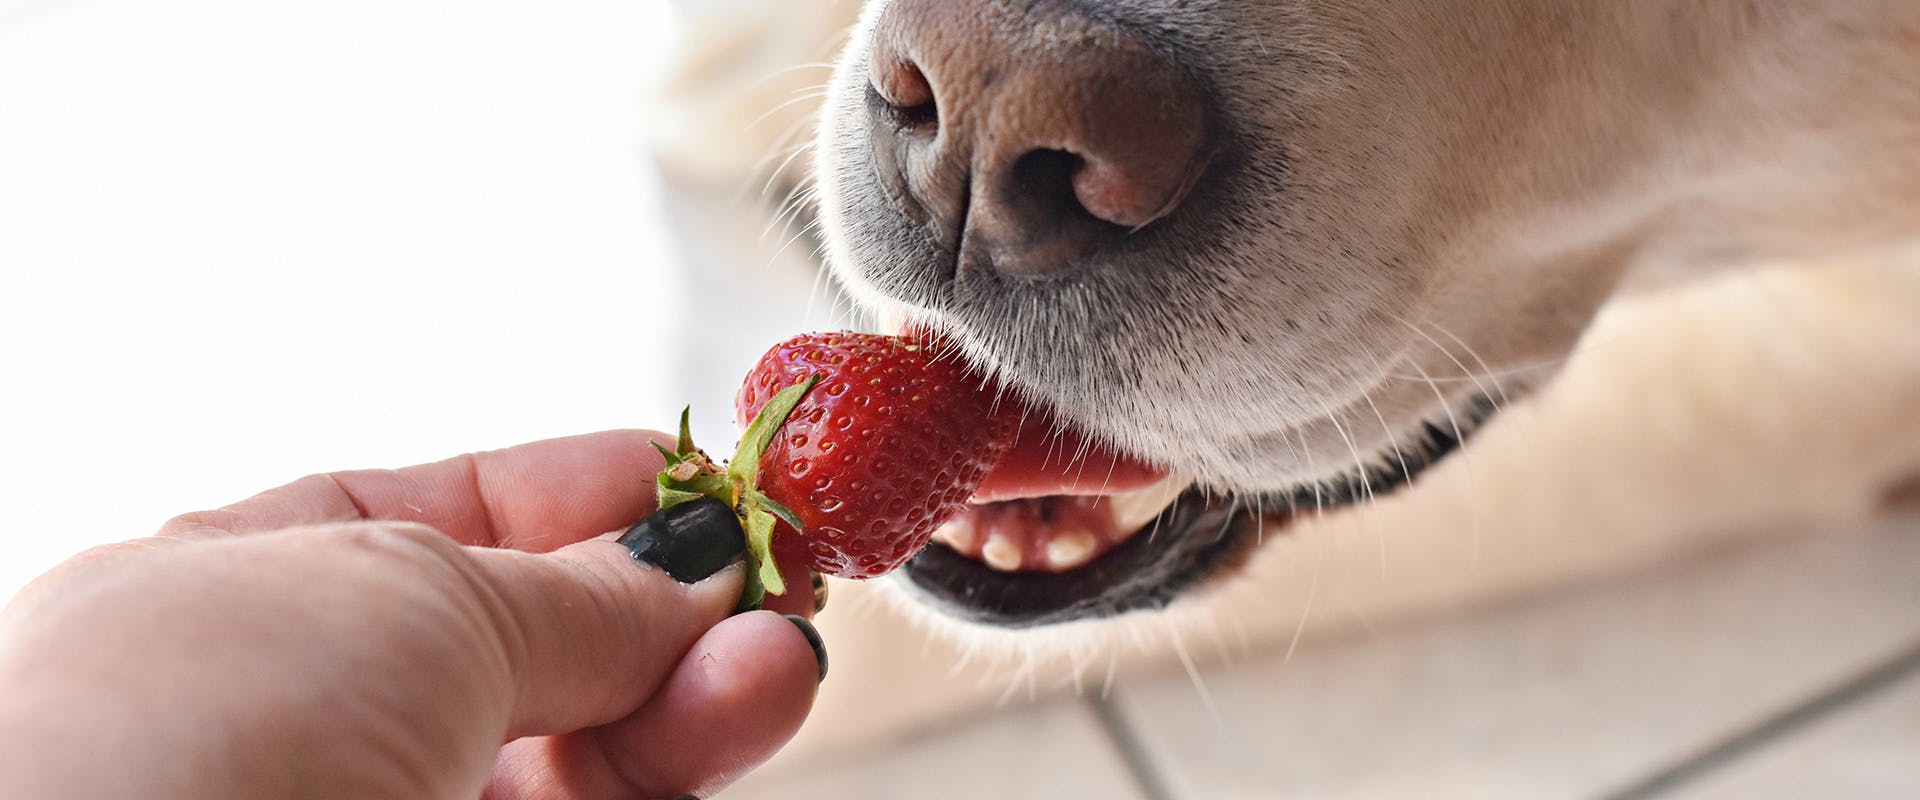 A dog eating a strawberry from a person's hand